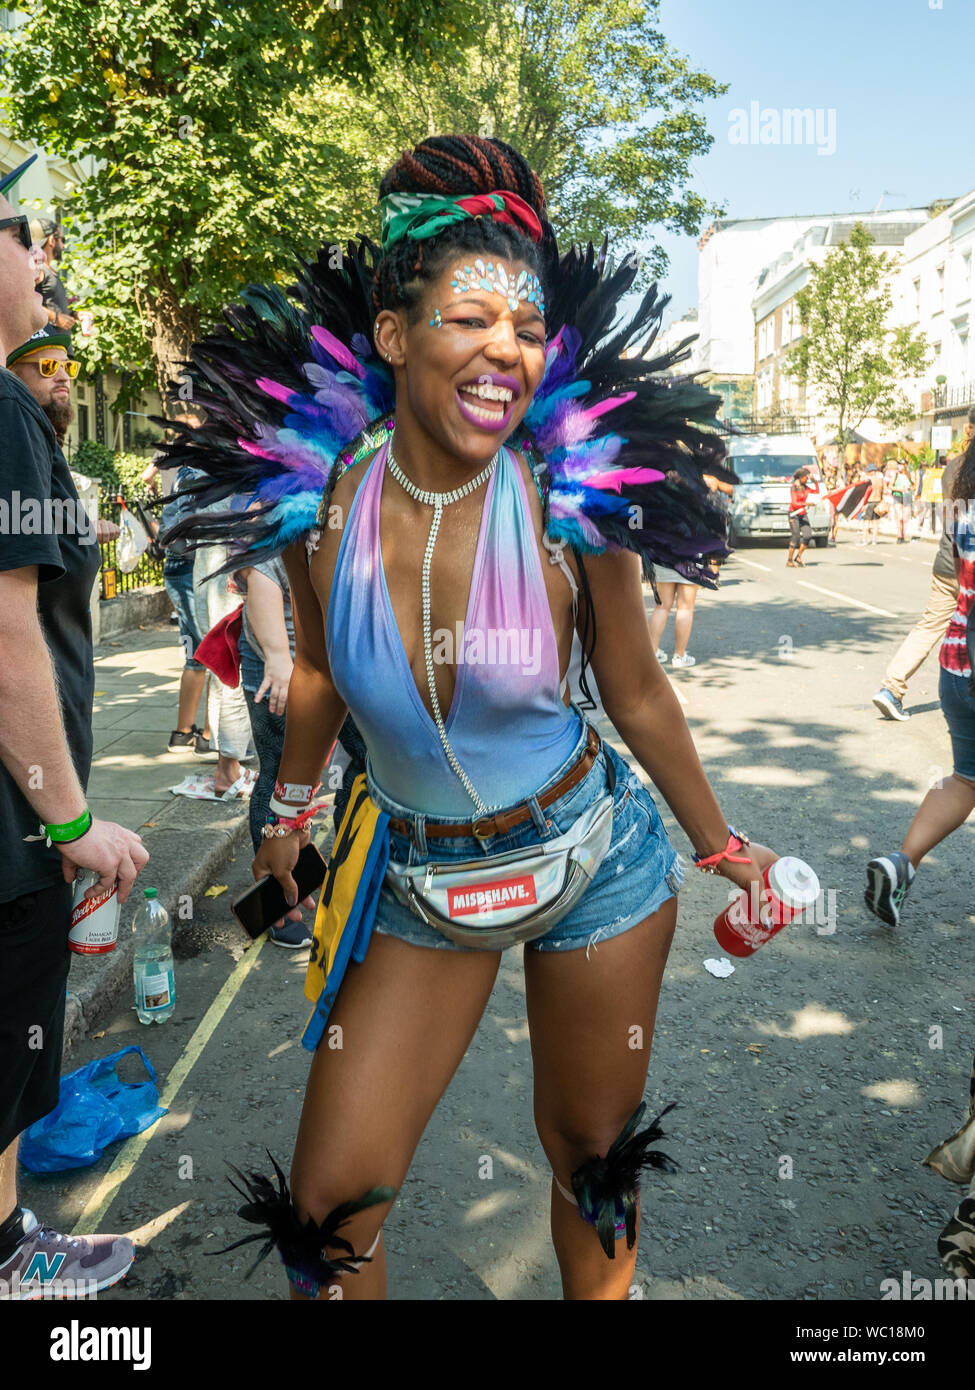 Happy confident lady at the Notting Hill Carnival London. Stock Photo